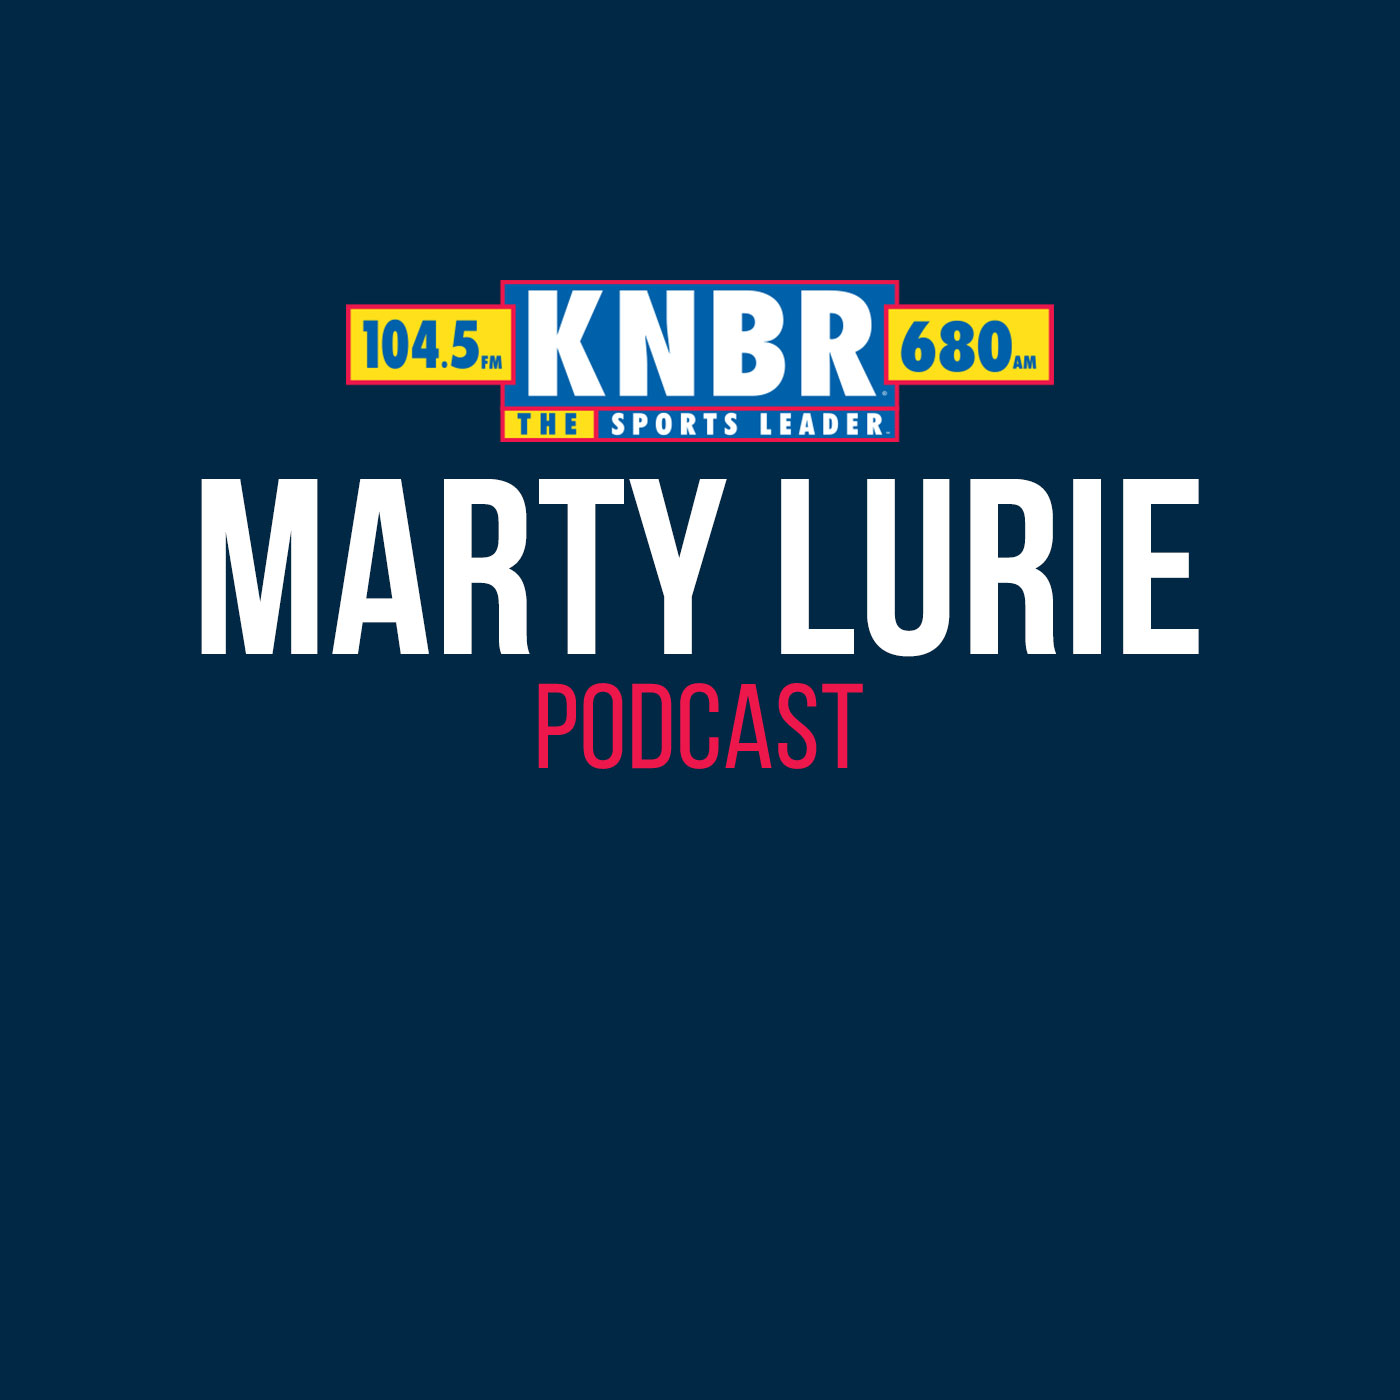 3-27 Melissa Lockard joins Marty Lurie to break down the Minor league season coming up in May